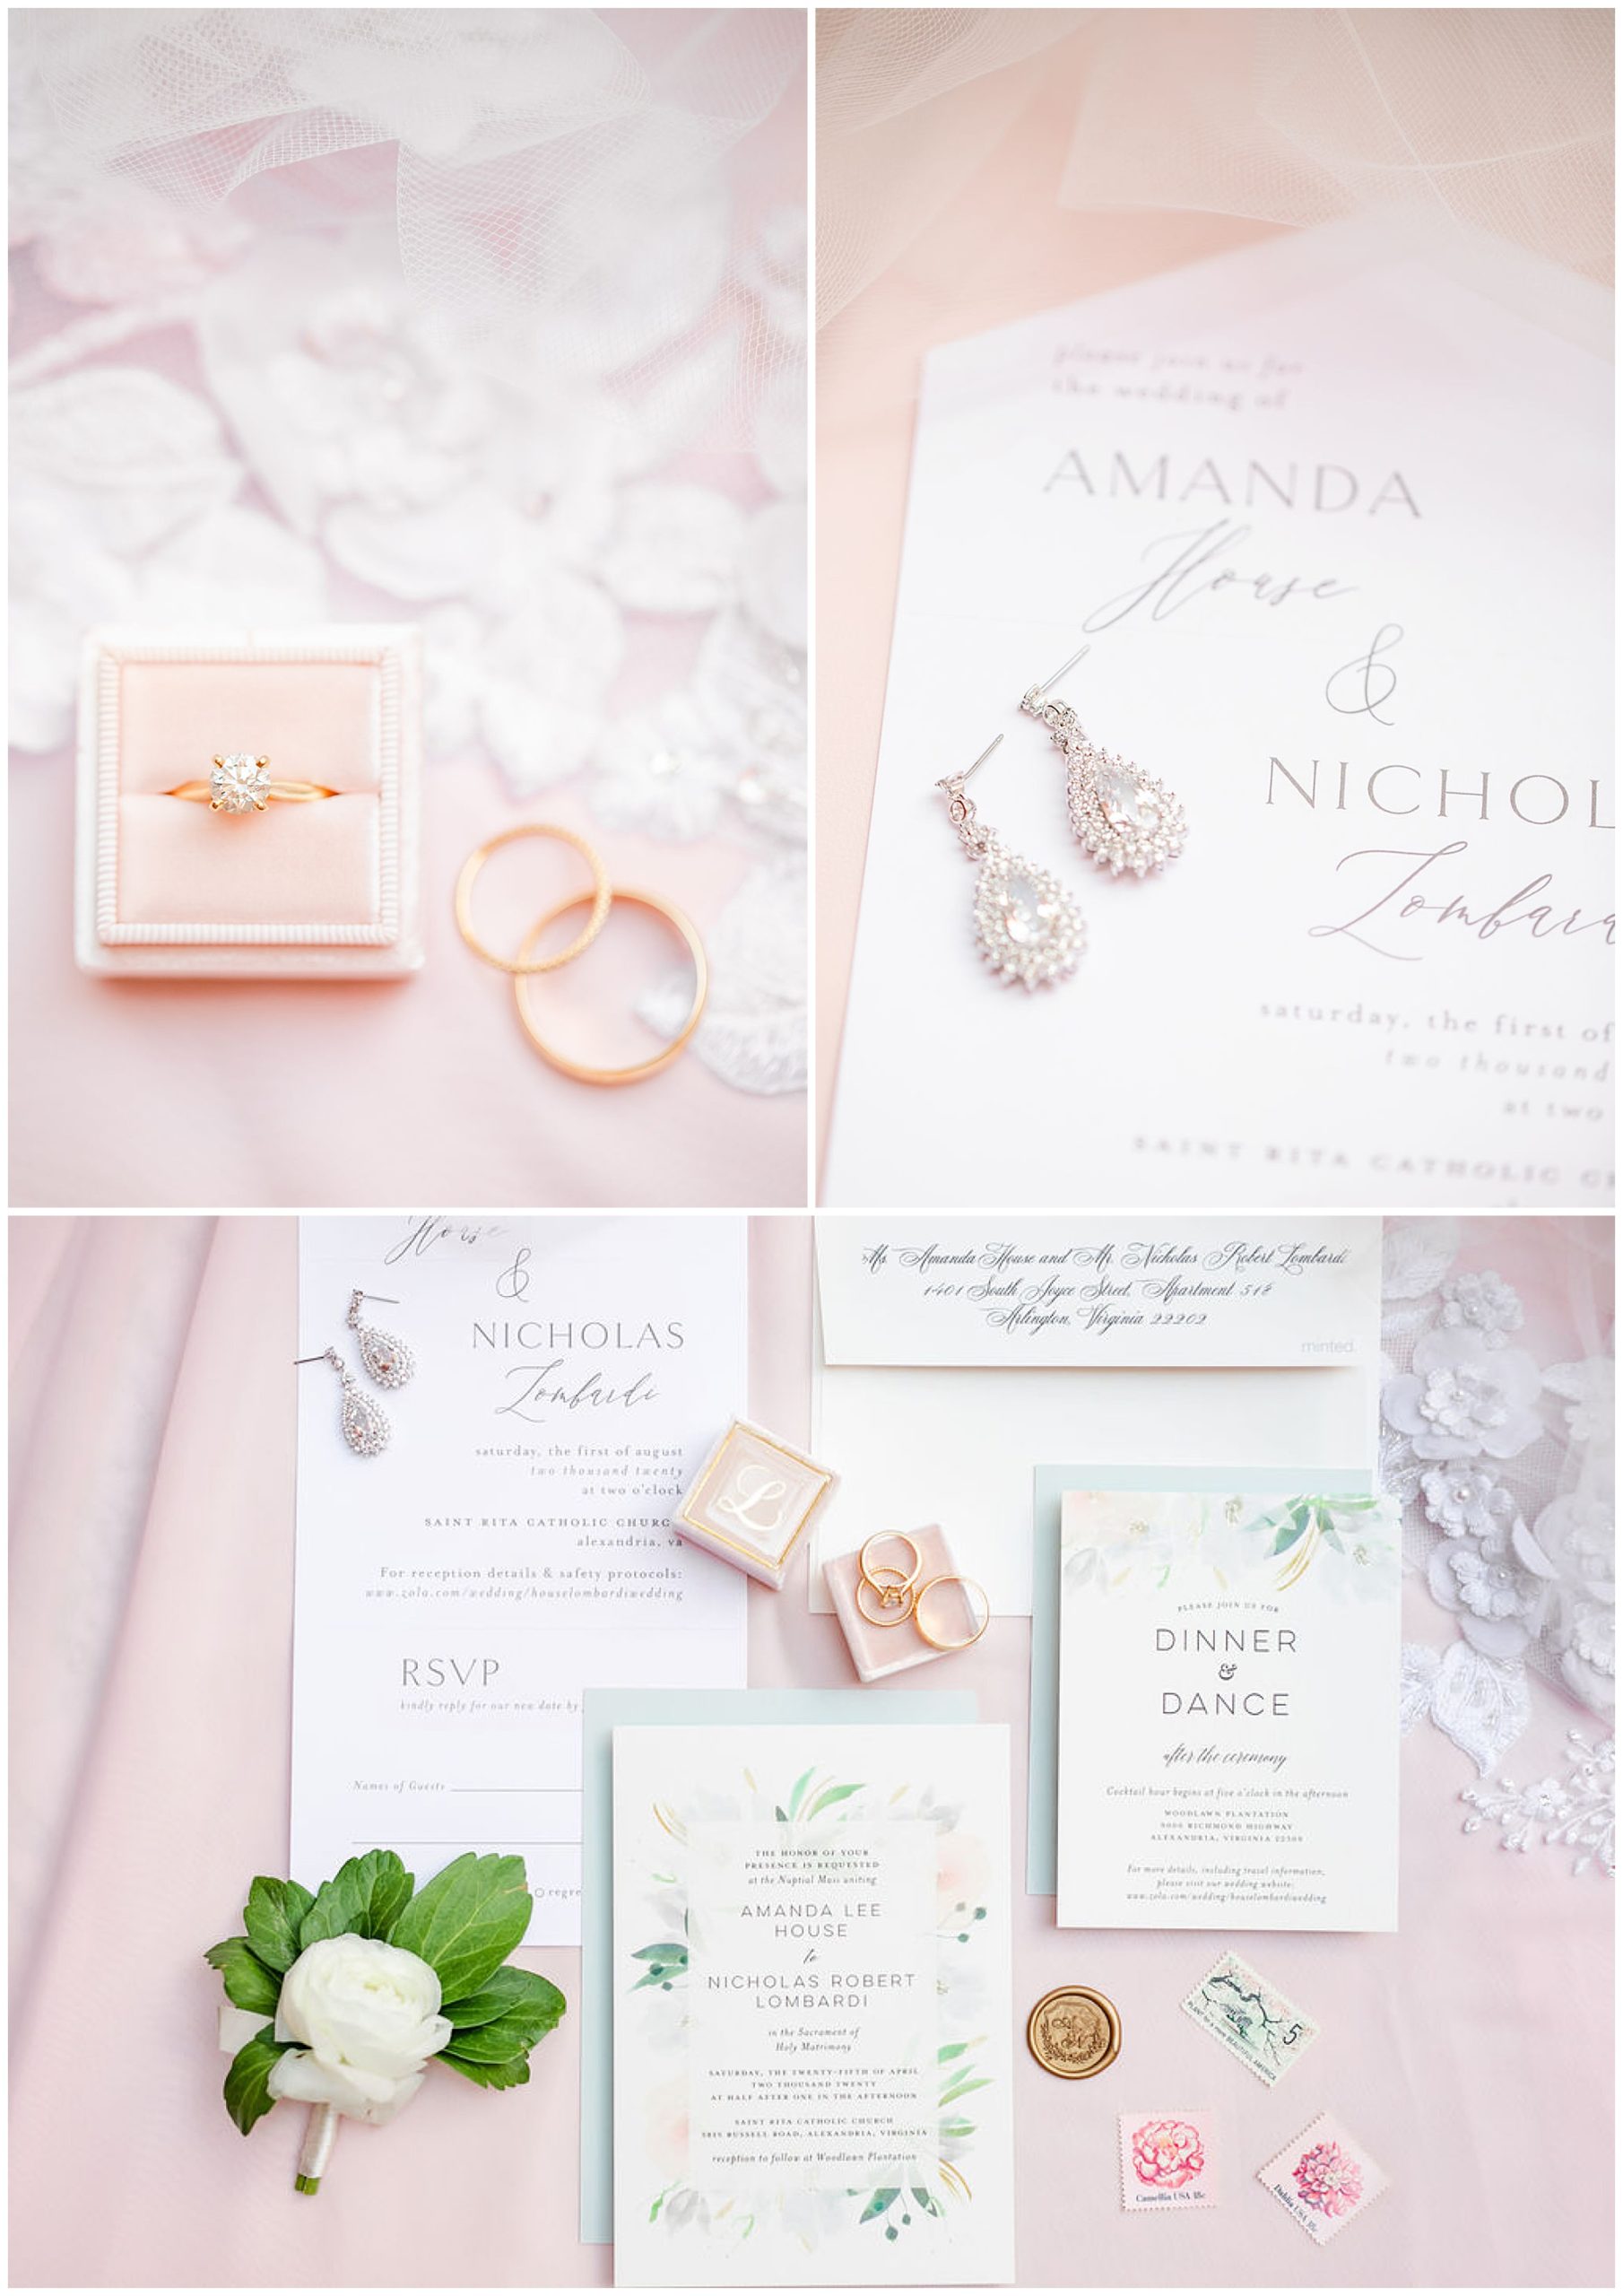 bridal details photo session, bridal details flatlay, flatlay photos, wedding details, wedding details photos, DC wedding photographer, wedding photography details, special wedding photos, flatlay photo session, DC wedding photographer, Rachel E.H. Photography, silver earrings, gold rings, pink ring box